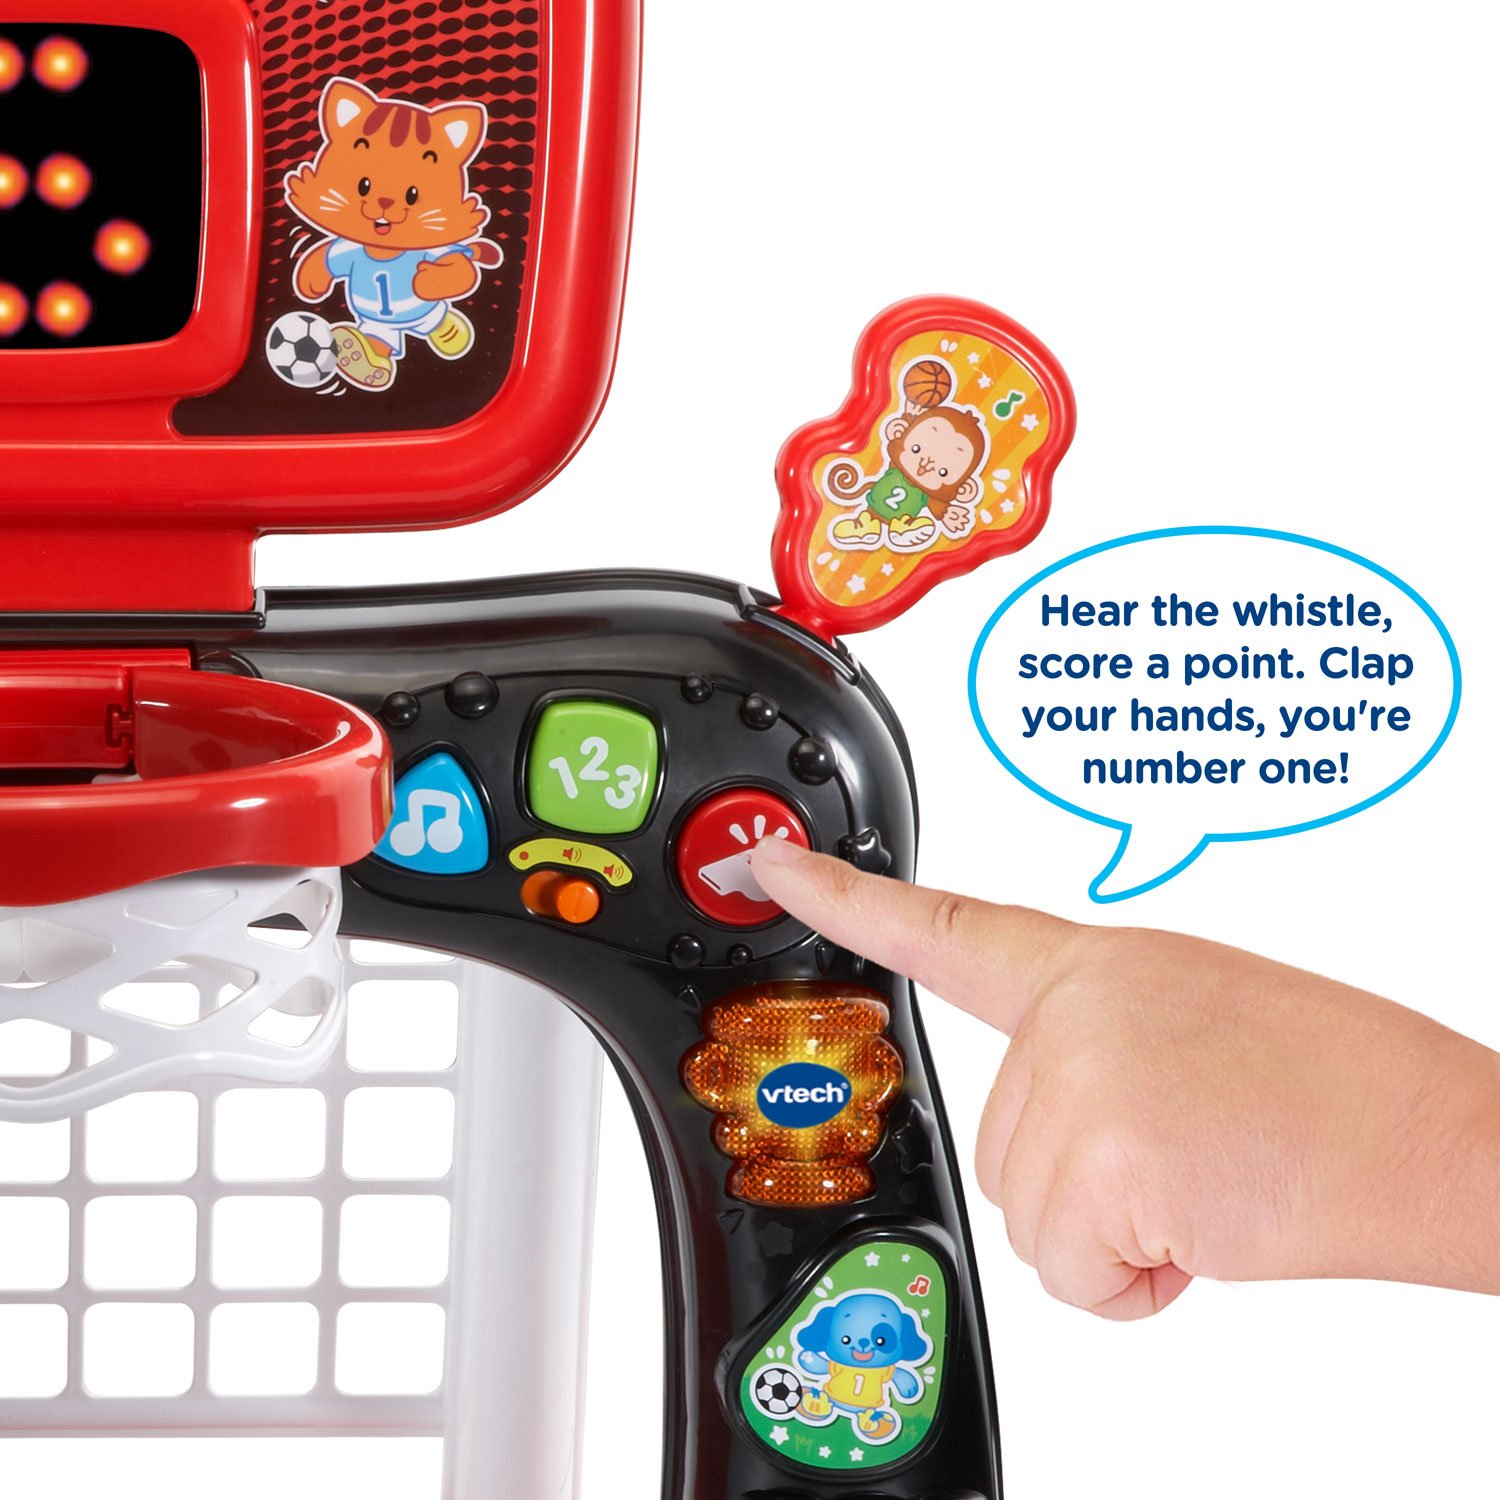 VTech Smart Shots Sports Center Amazon Exclusive (Frustration Free Packaging), Plastic